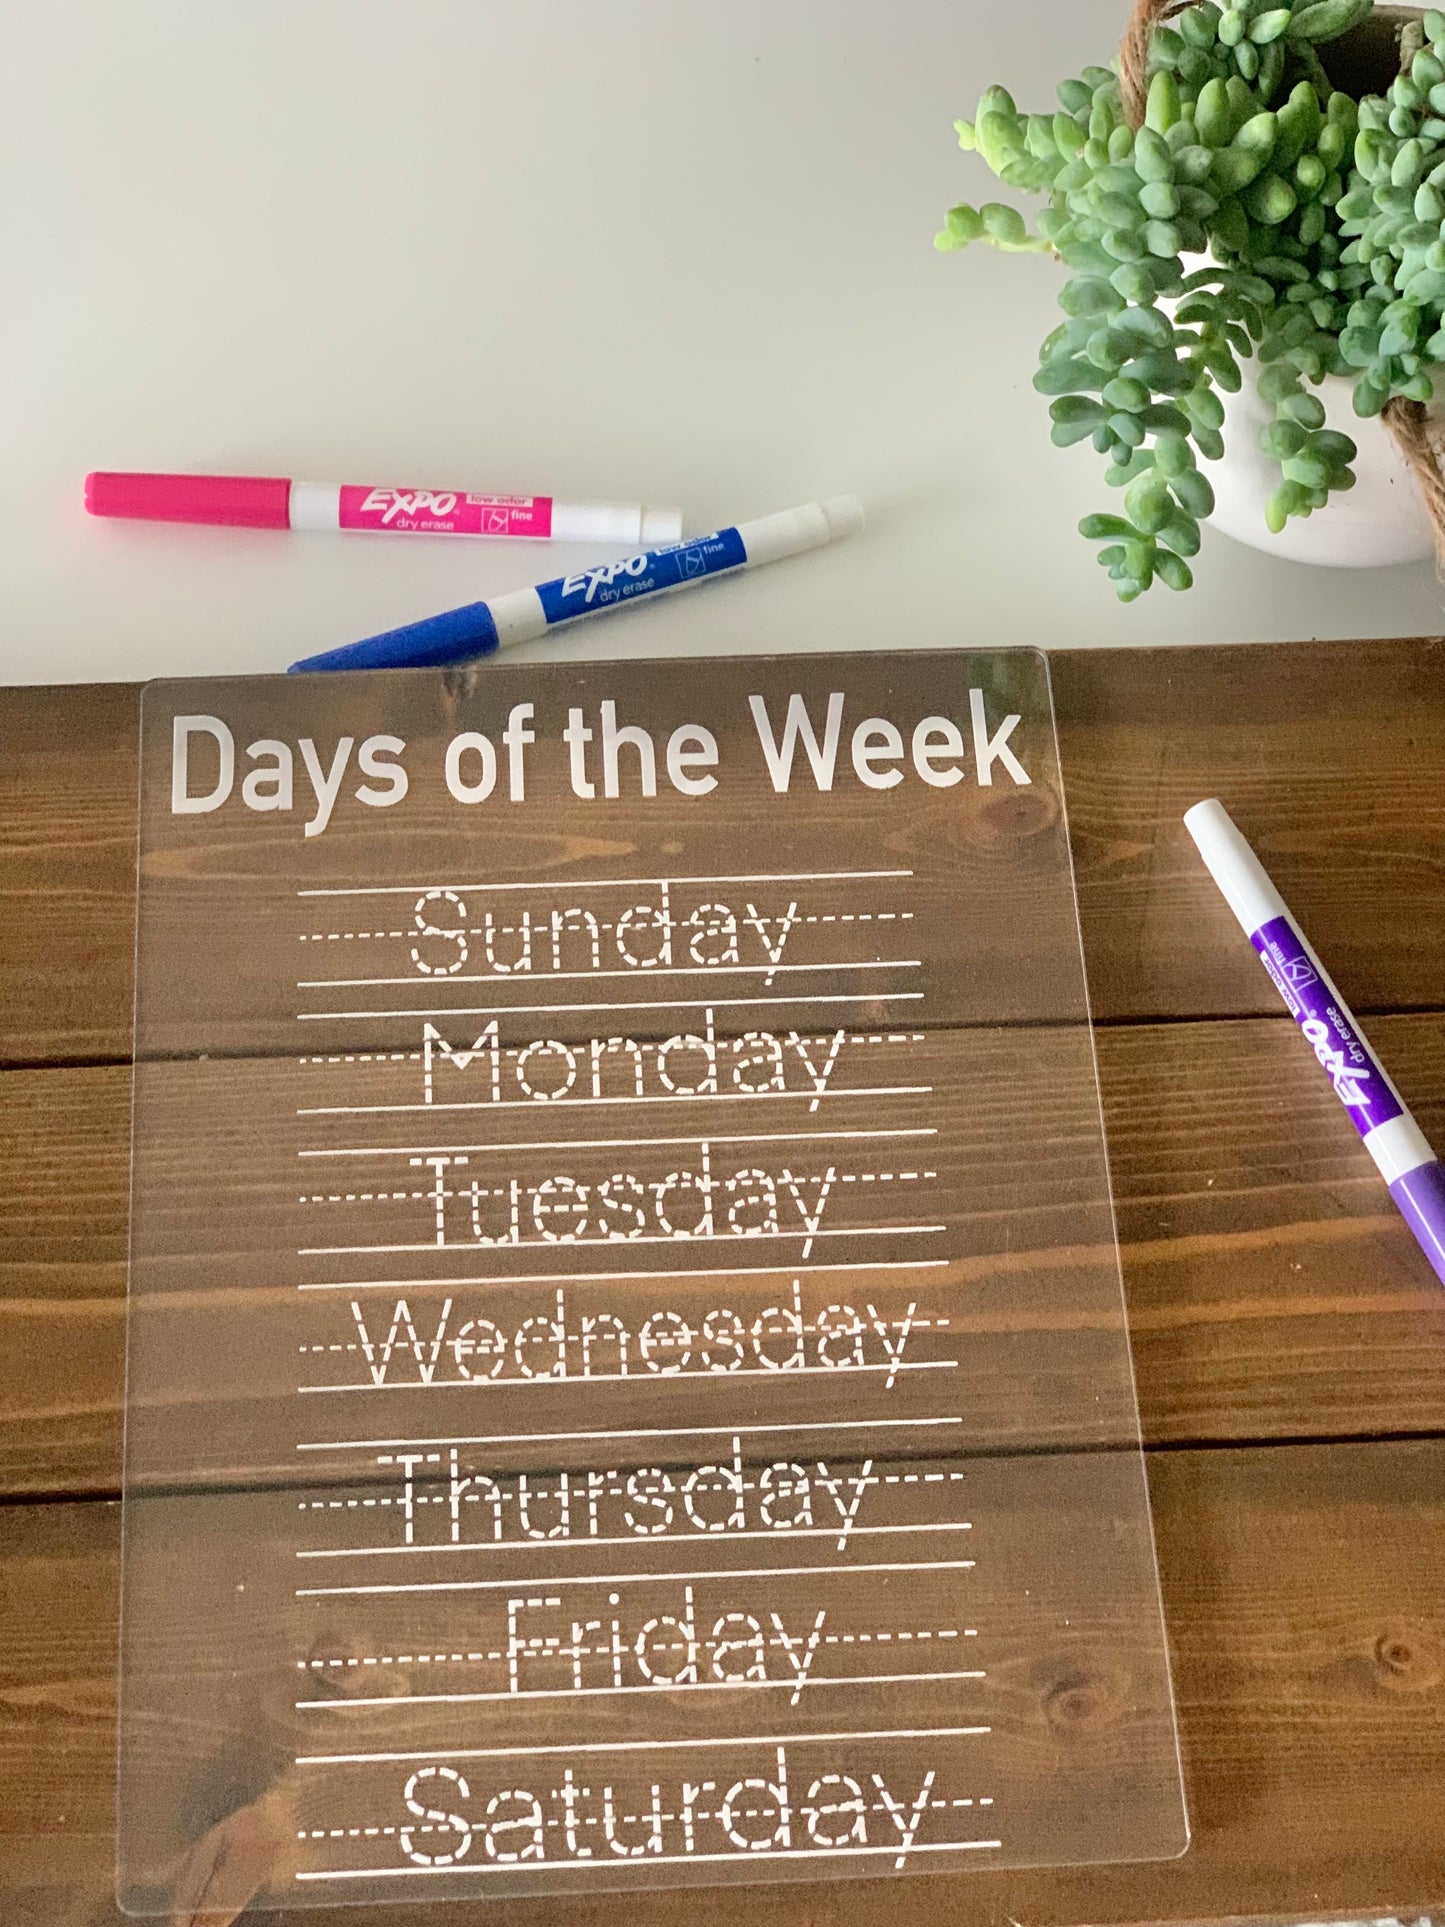 Days of the Week Acrylic Dry Erase Board